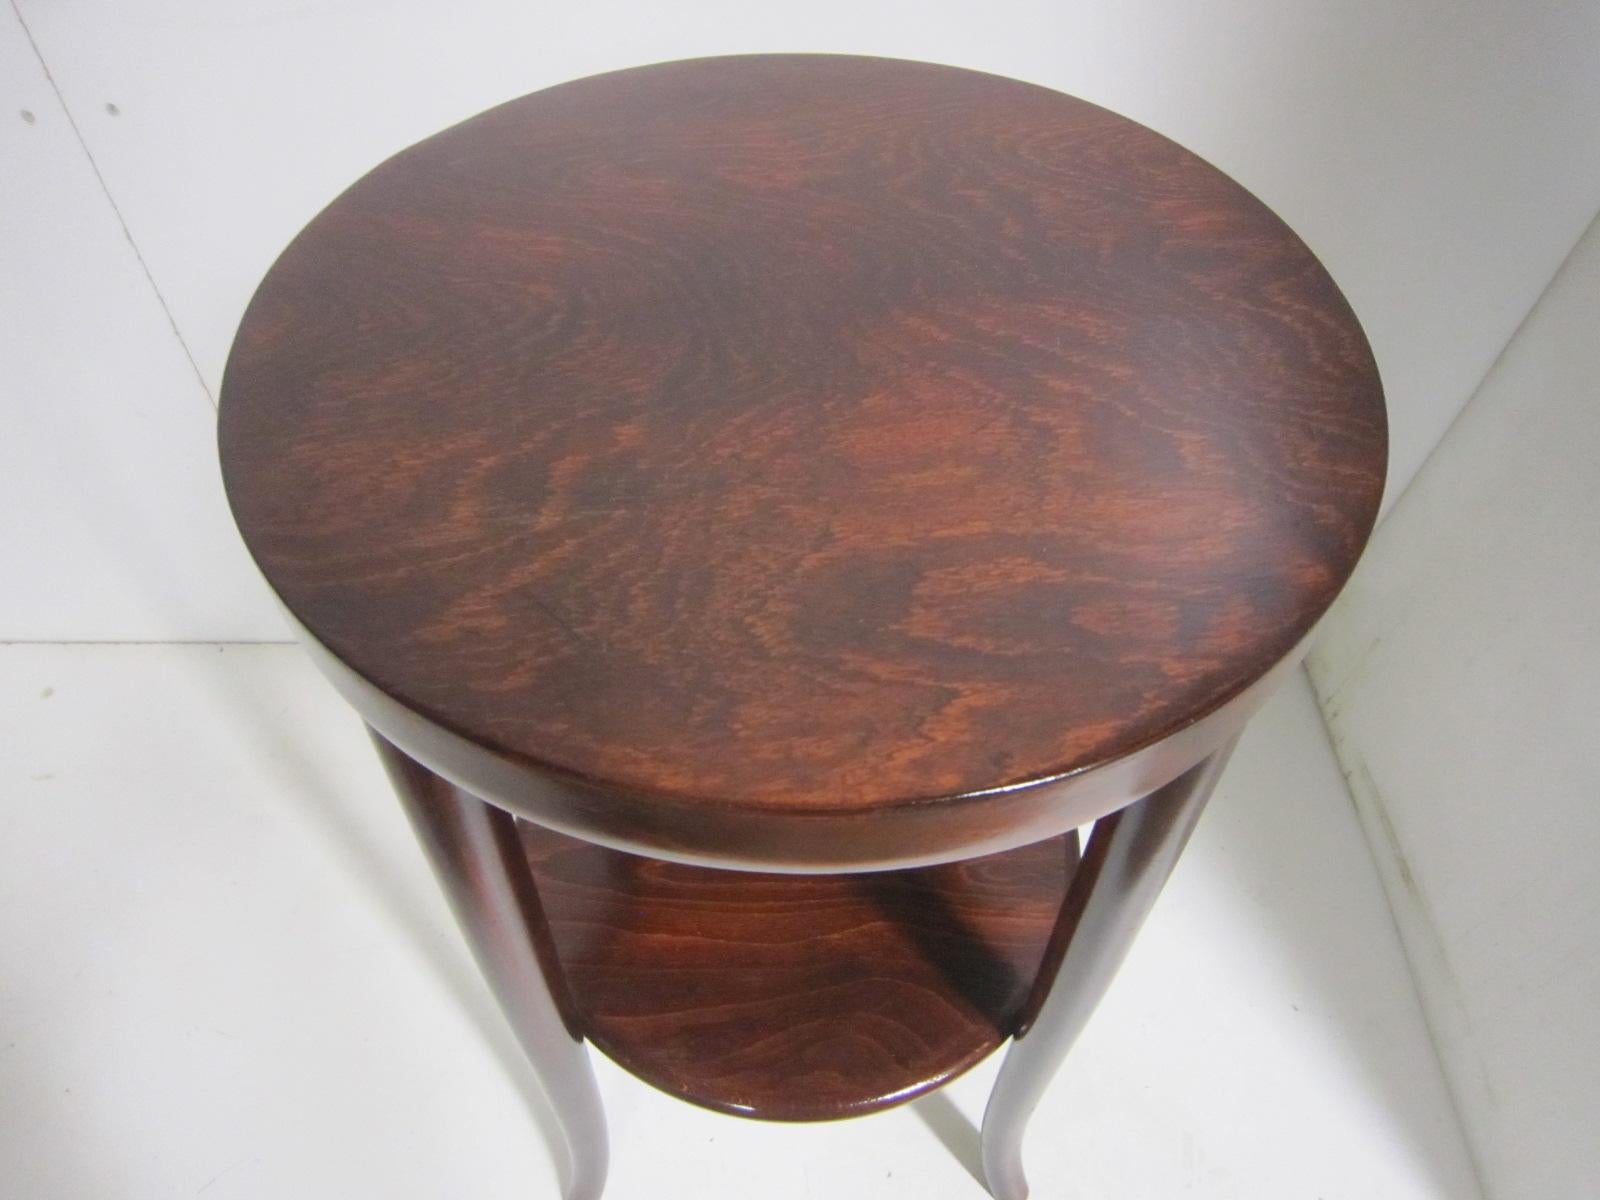 Original Austrian Small Round Bentwood Jungenstil Side Table with Oxblood Finish 5